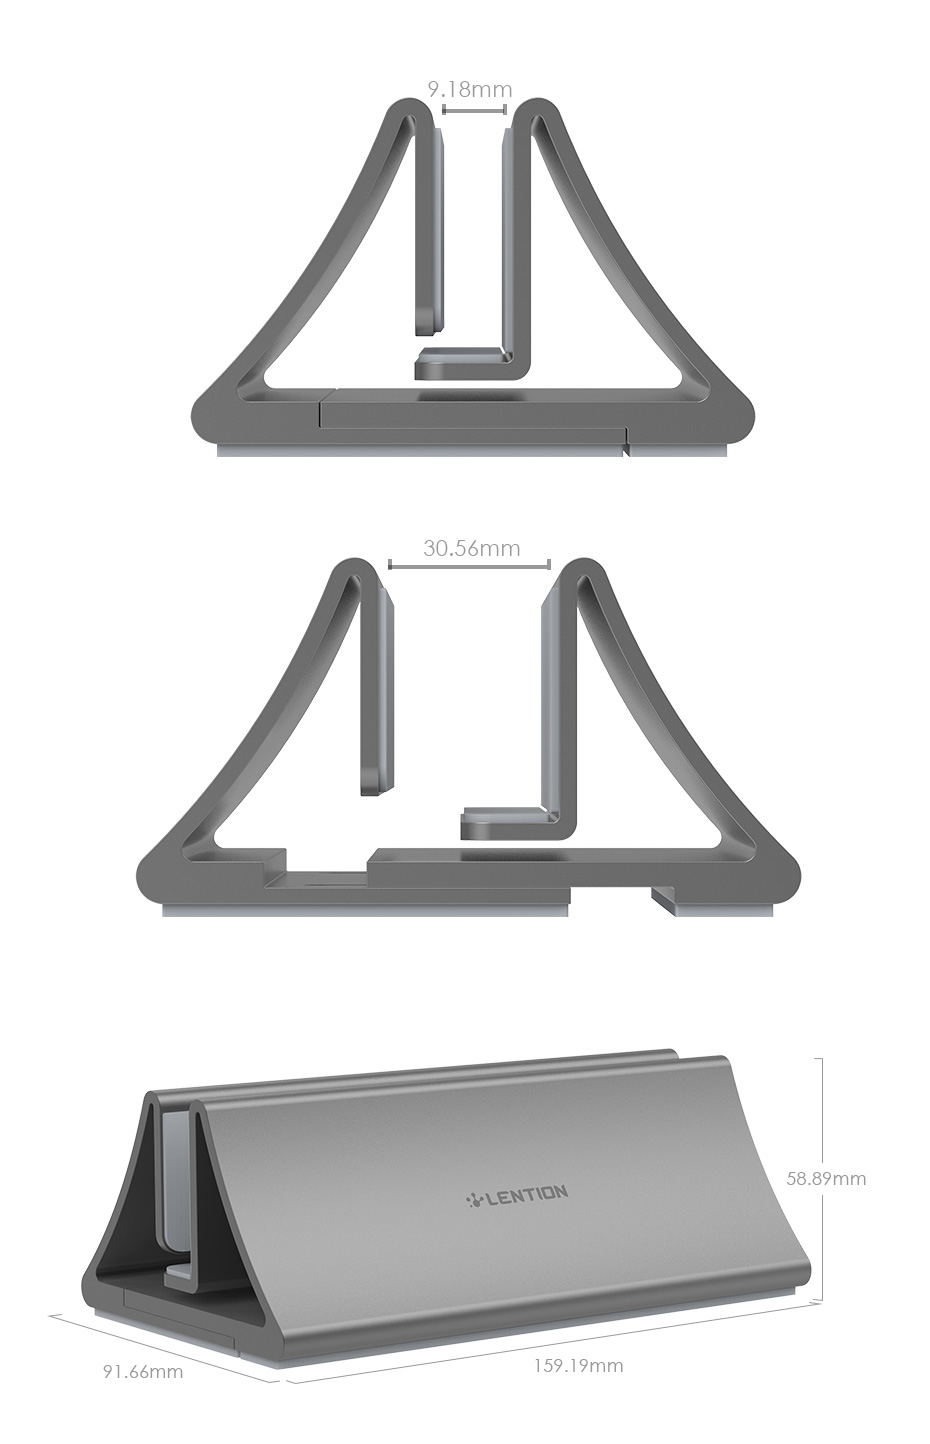 Lention-Aluminum-Alloy-Vertical-Stand-Adjustable-Laptop-Storage-Stand-for-9mm-305mm-Thickness-Laptop-1931743-7